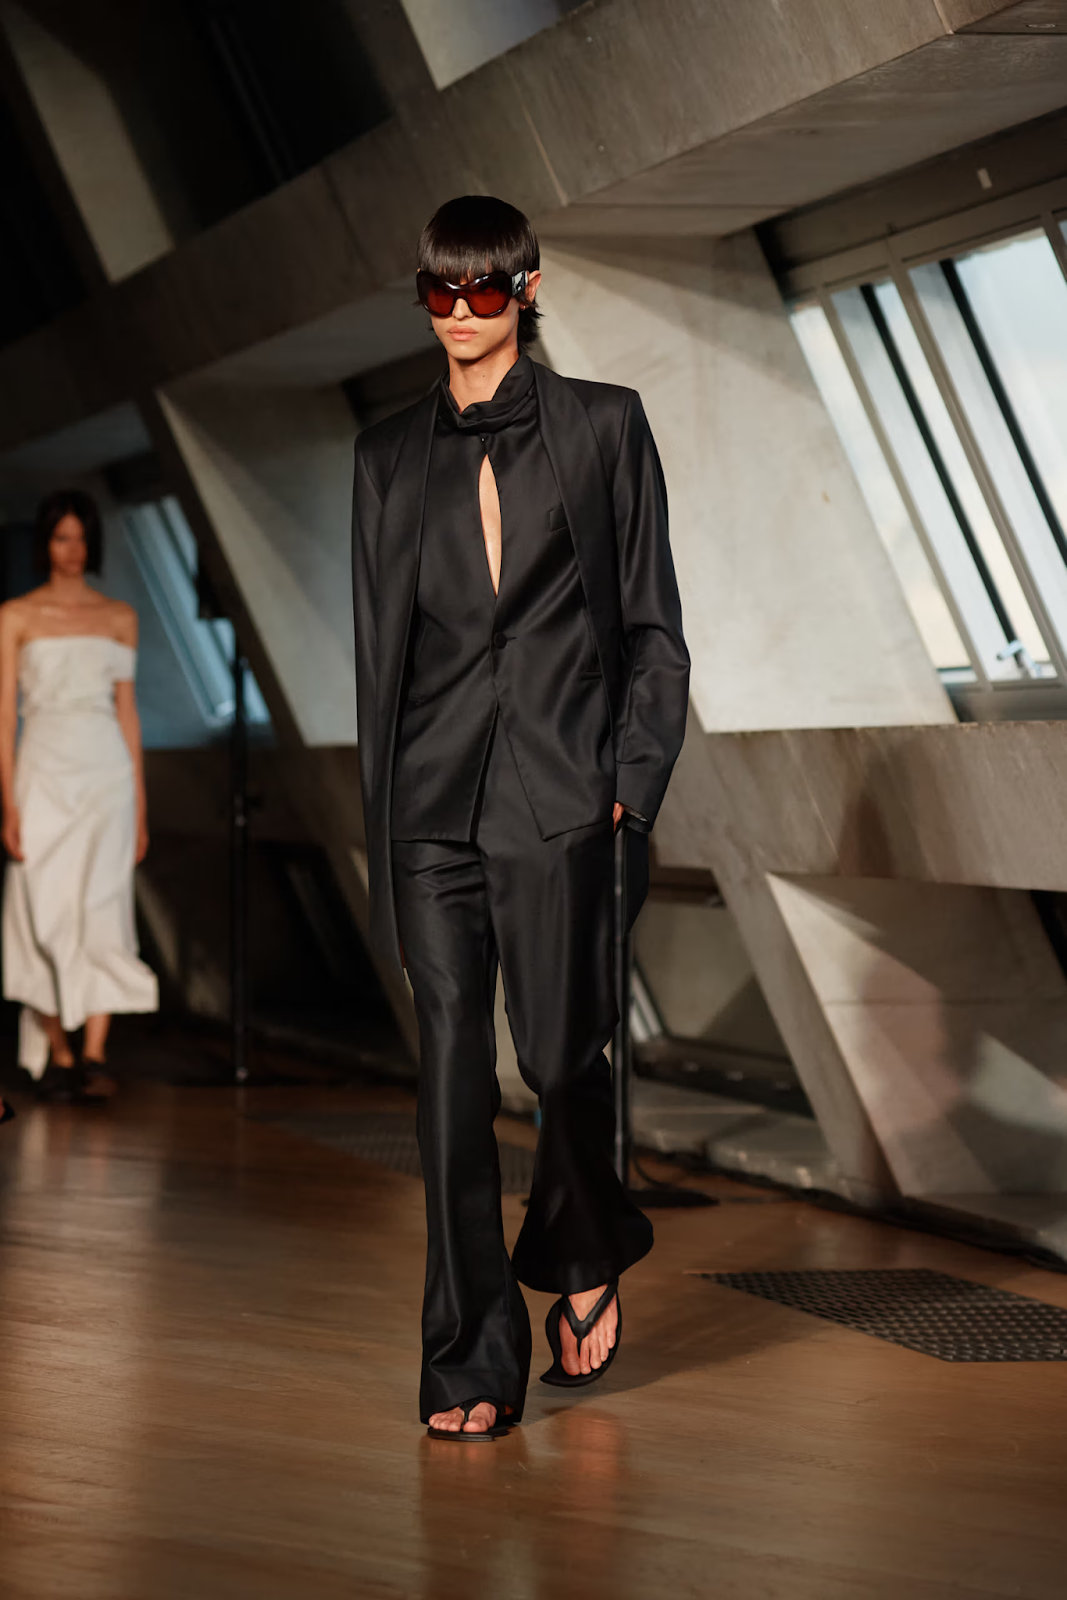 The gorgeous model rocks black suit and chic trousers for London fashion week 2023